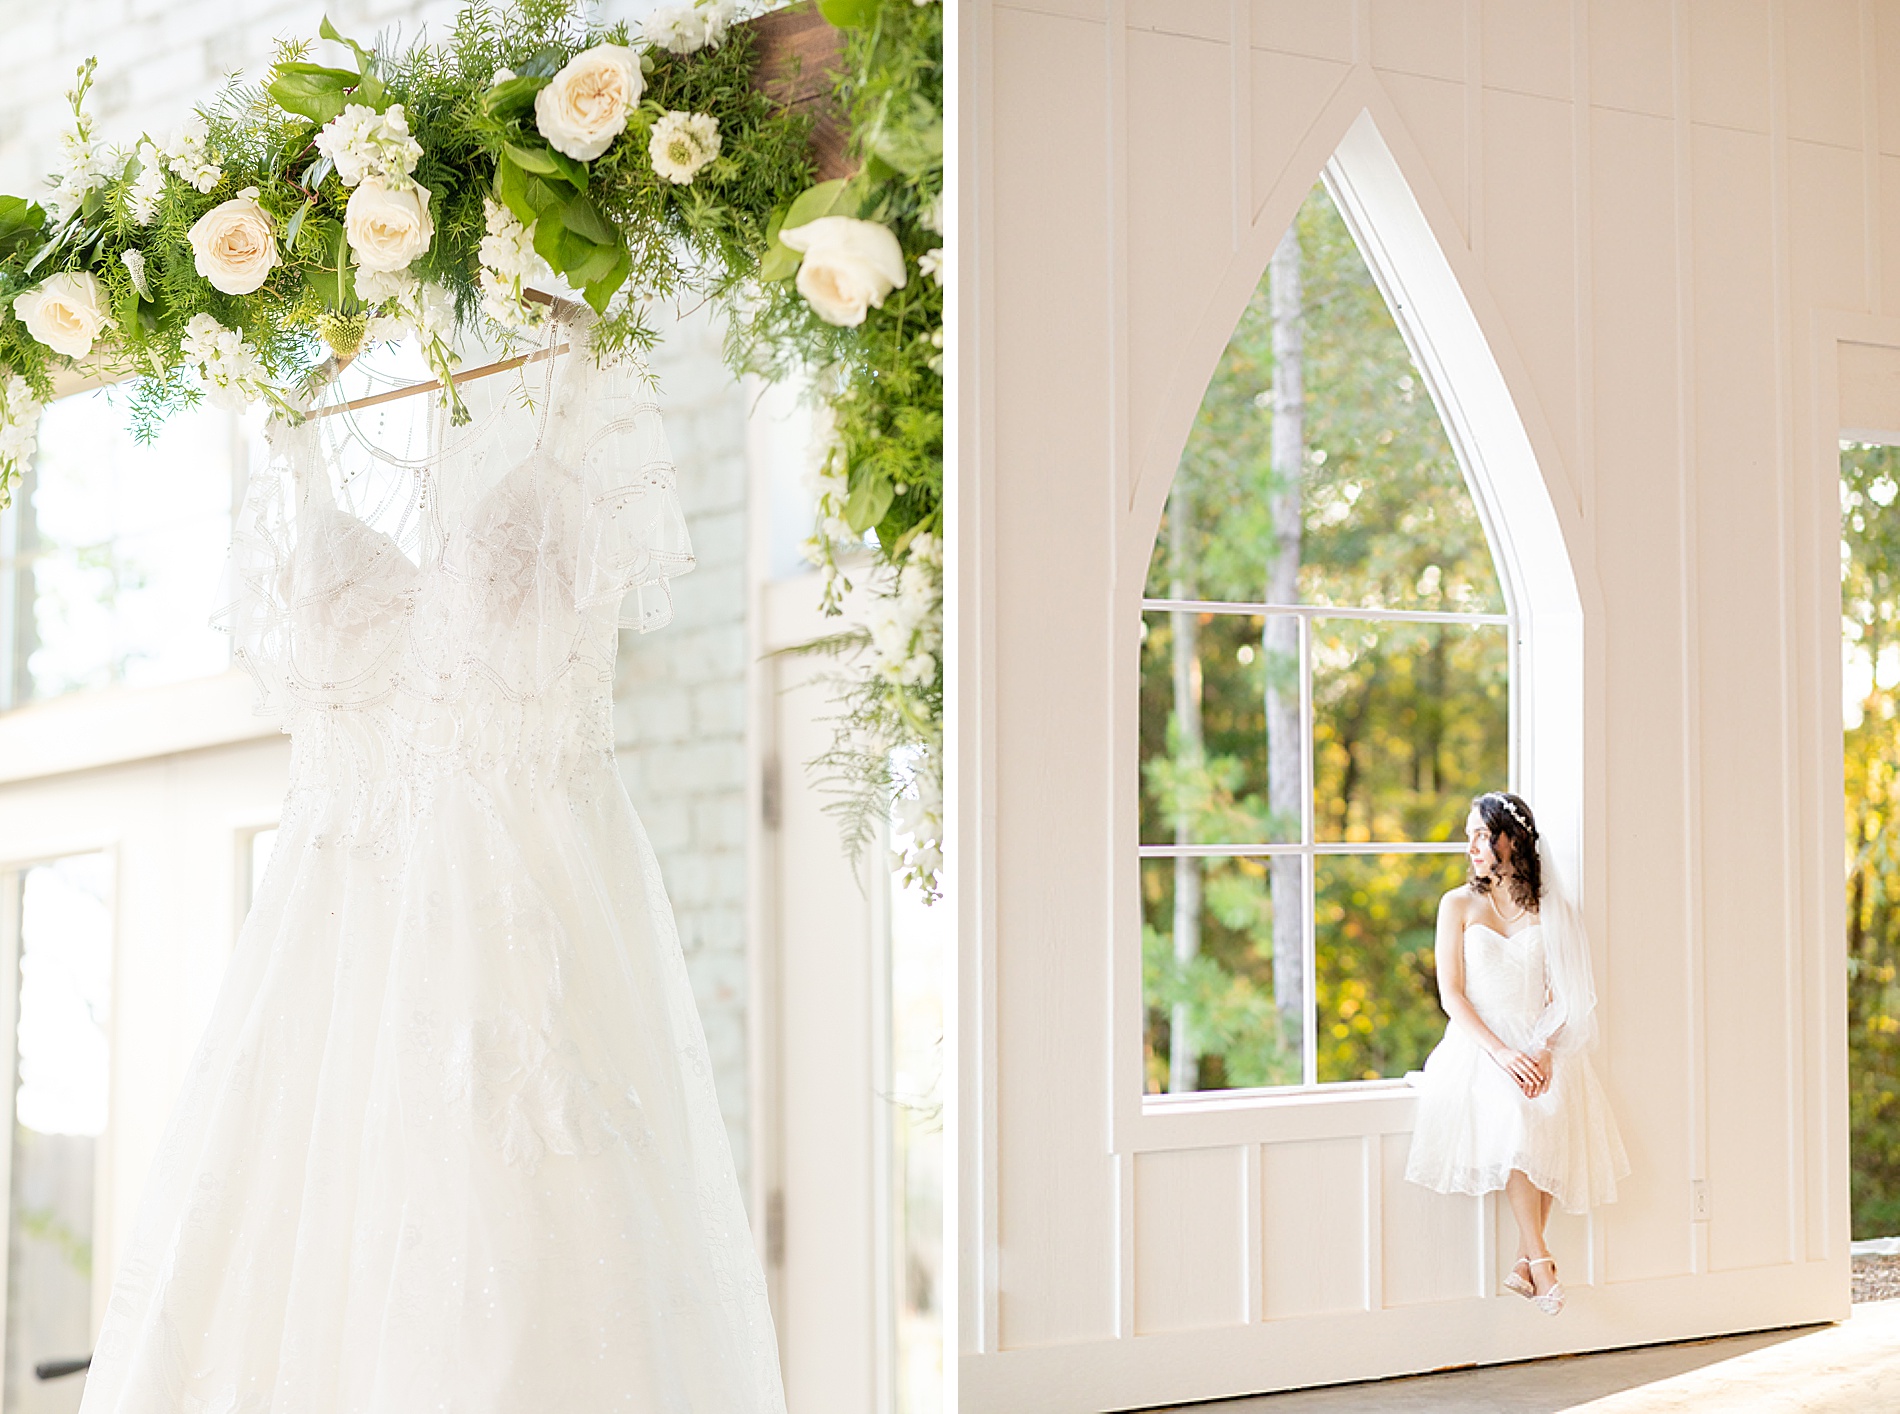 Bridal details from wedding captured by South Carolina Wedding photographer, Sarah Claire Portraiture 